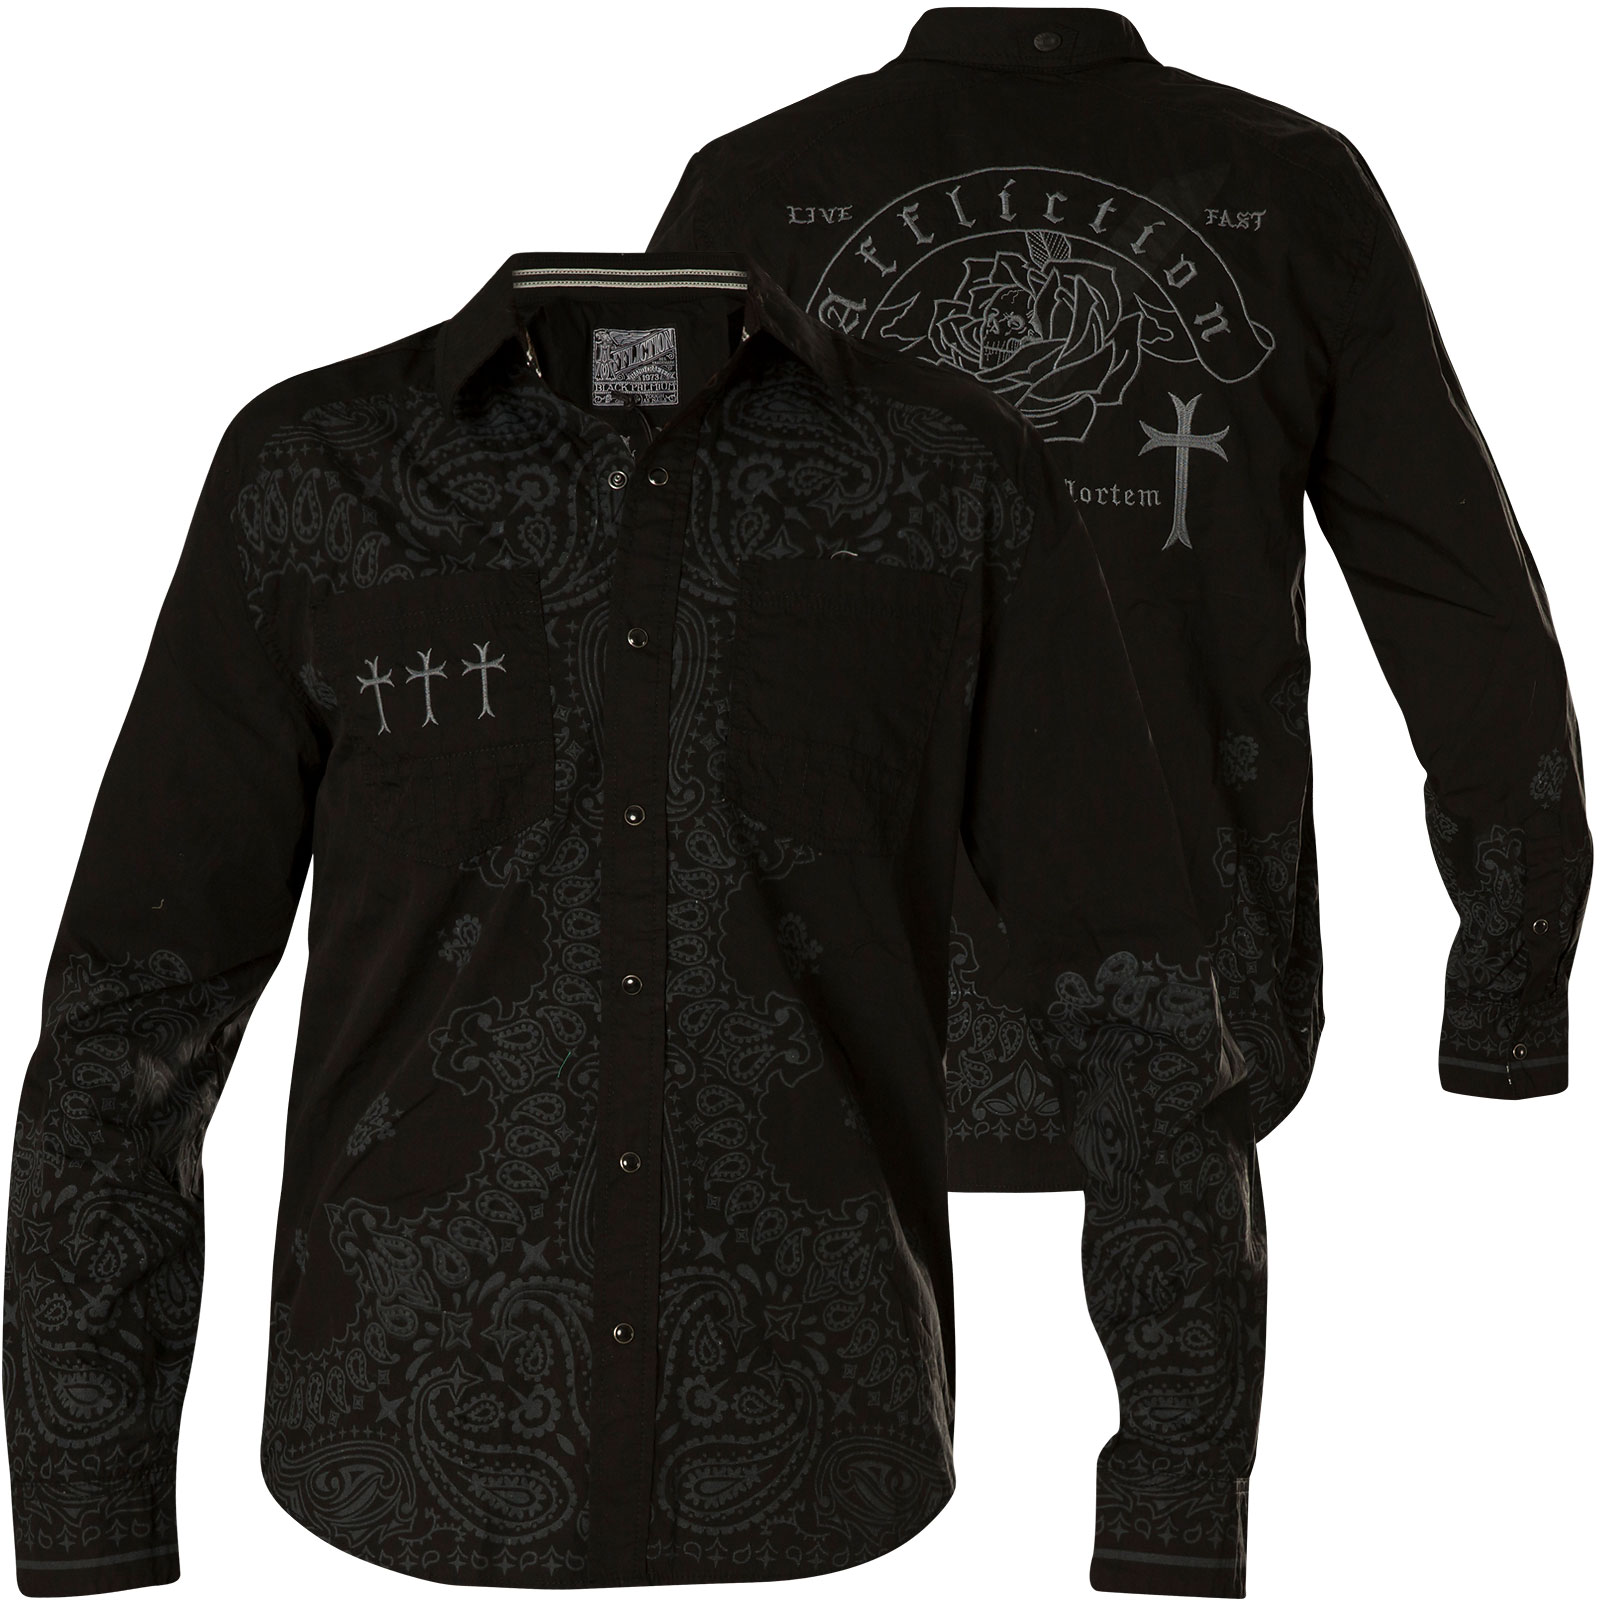 Affliction Shirt Crucial featuring a large embroidery